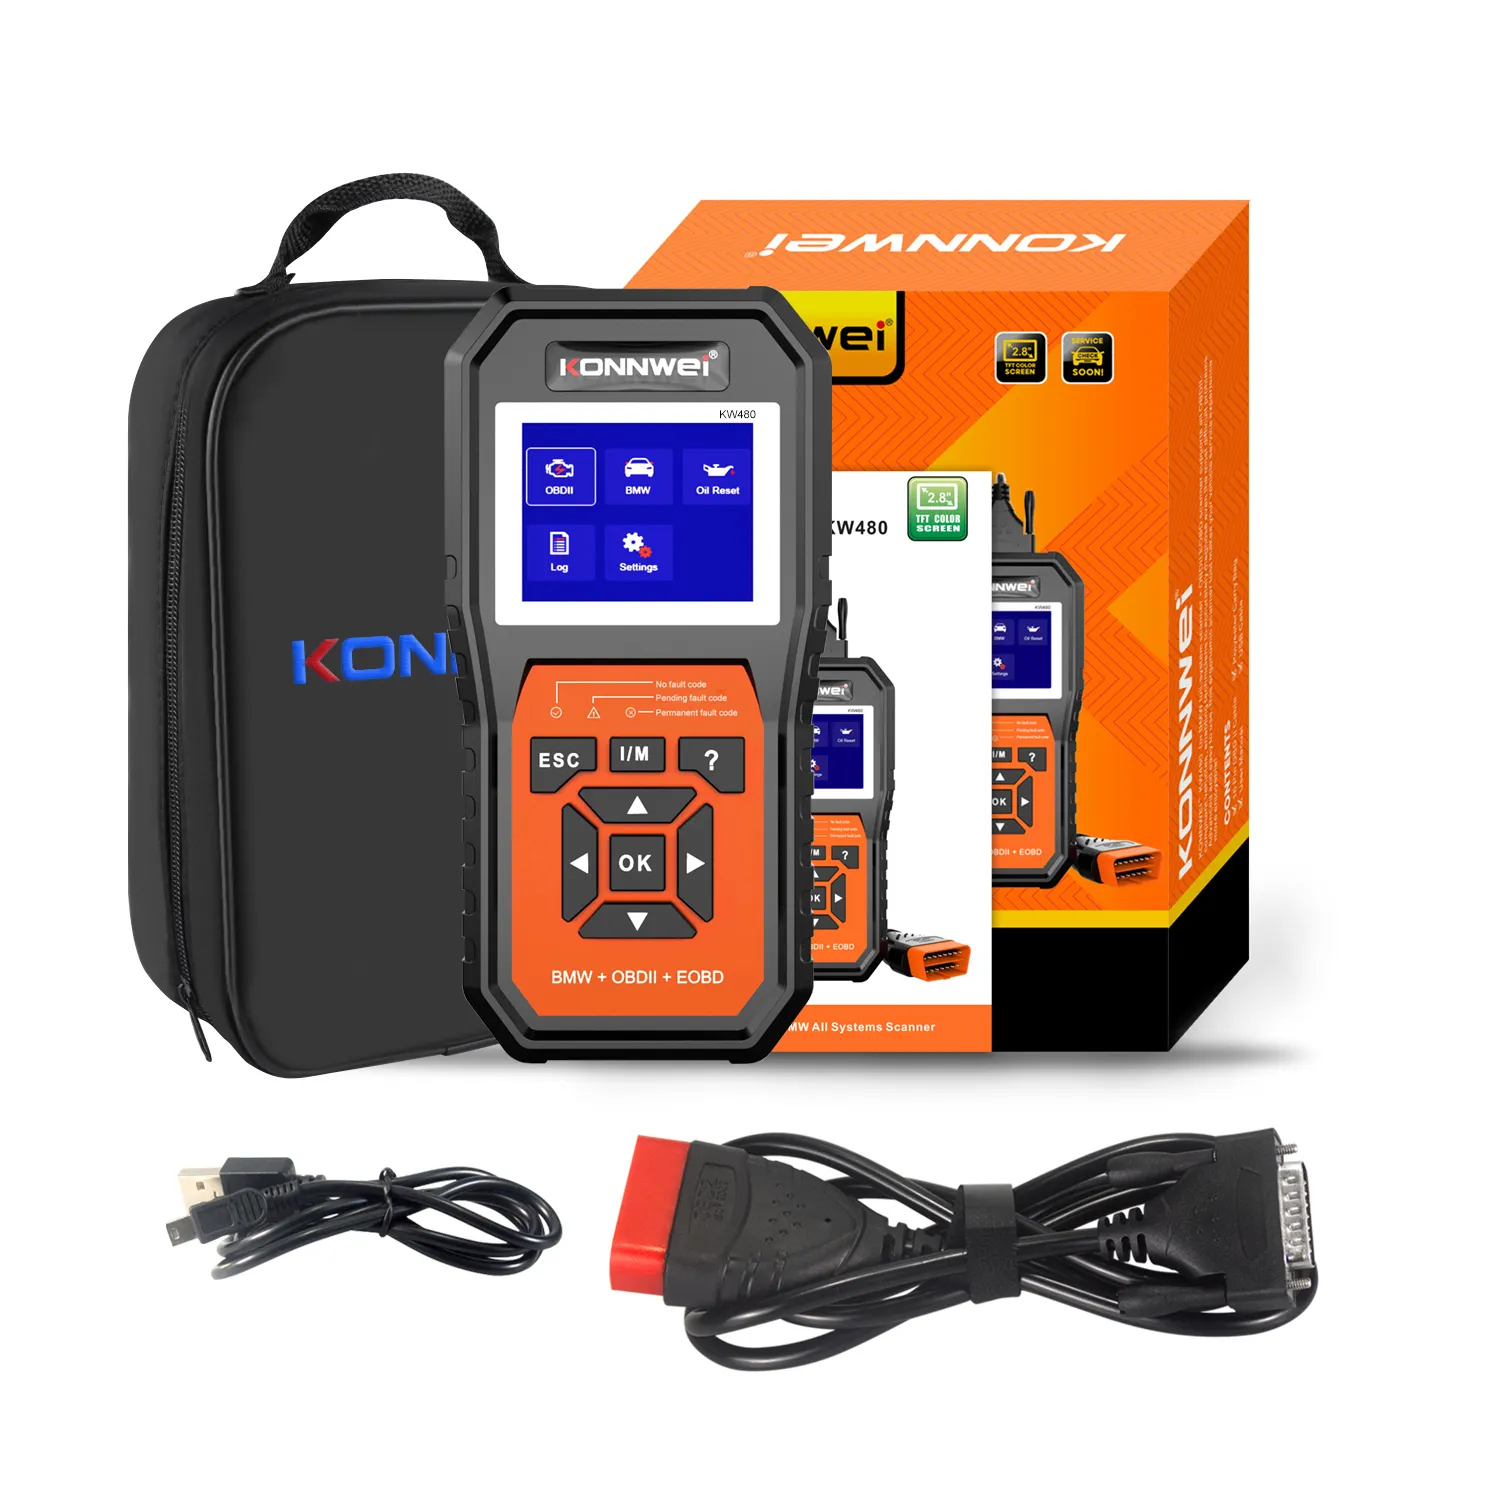 Vollsystem-Diagnose tools mit Motor/ABS/VCS/EBS/SRS/Federung/Batterie/Getriebe prüfung Cars Codes Reader